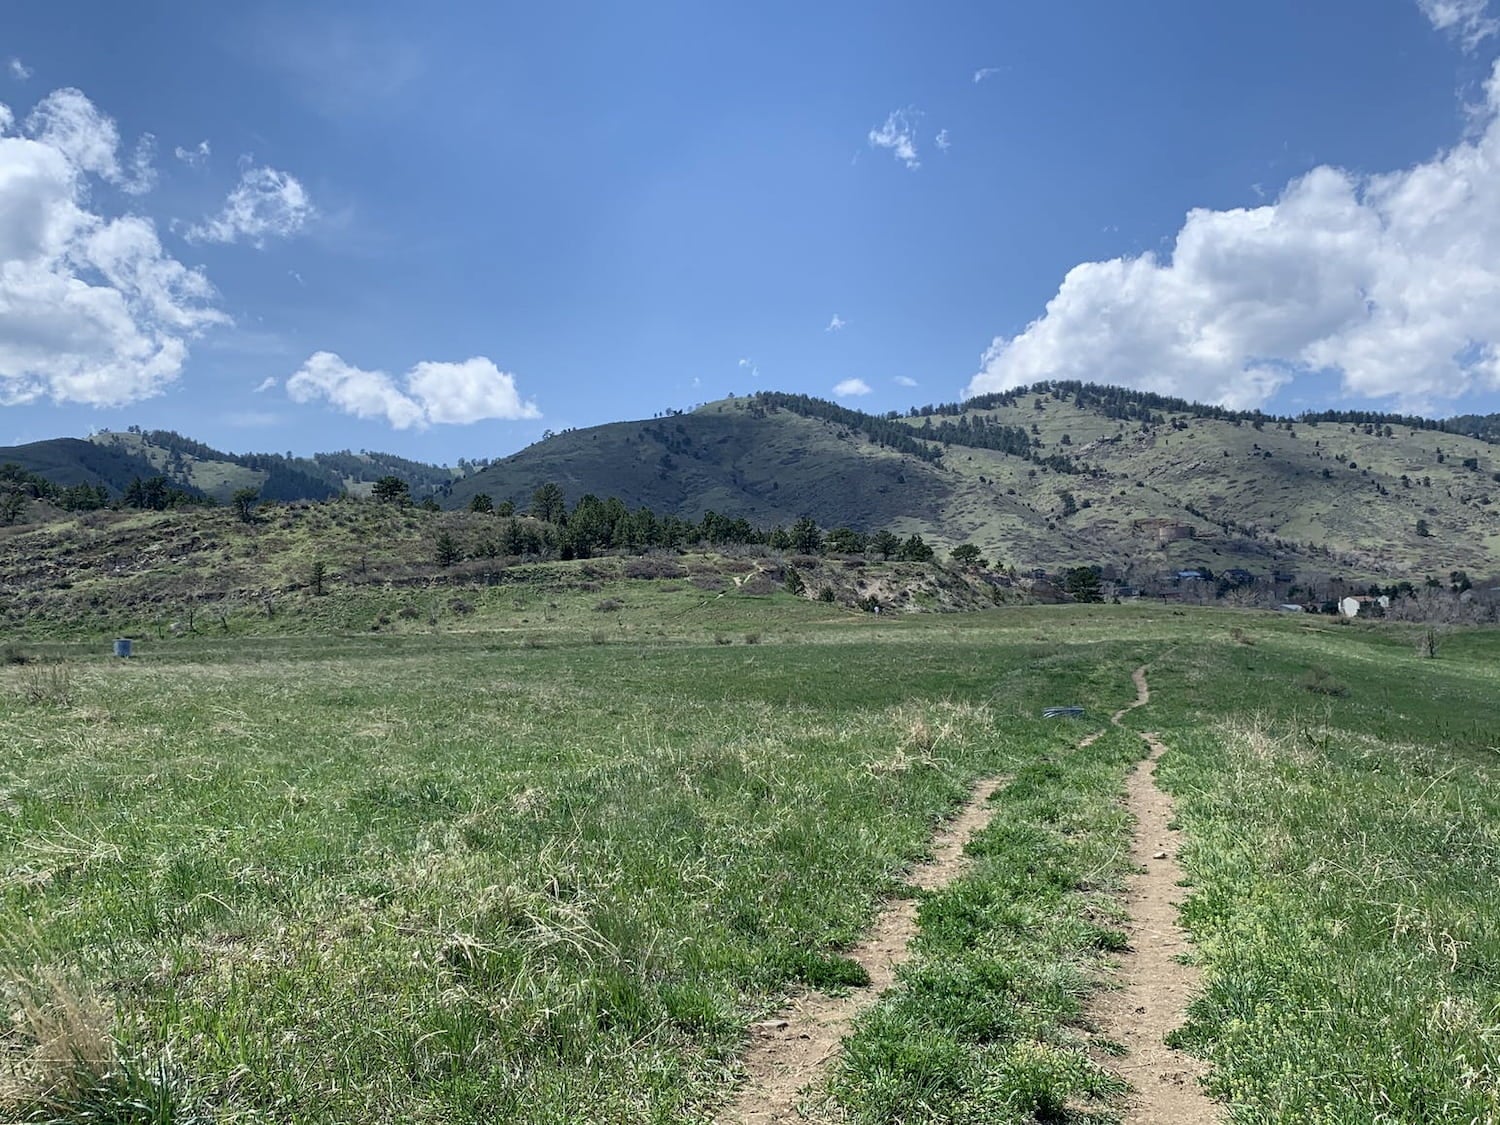 Dirt road in meadow with mountains in background